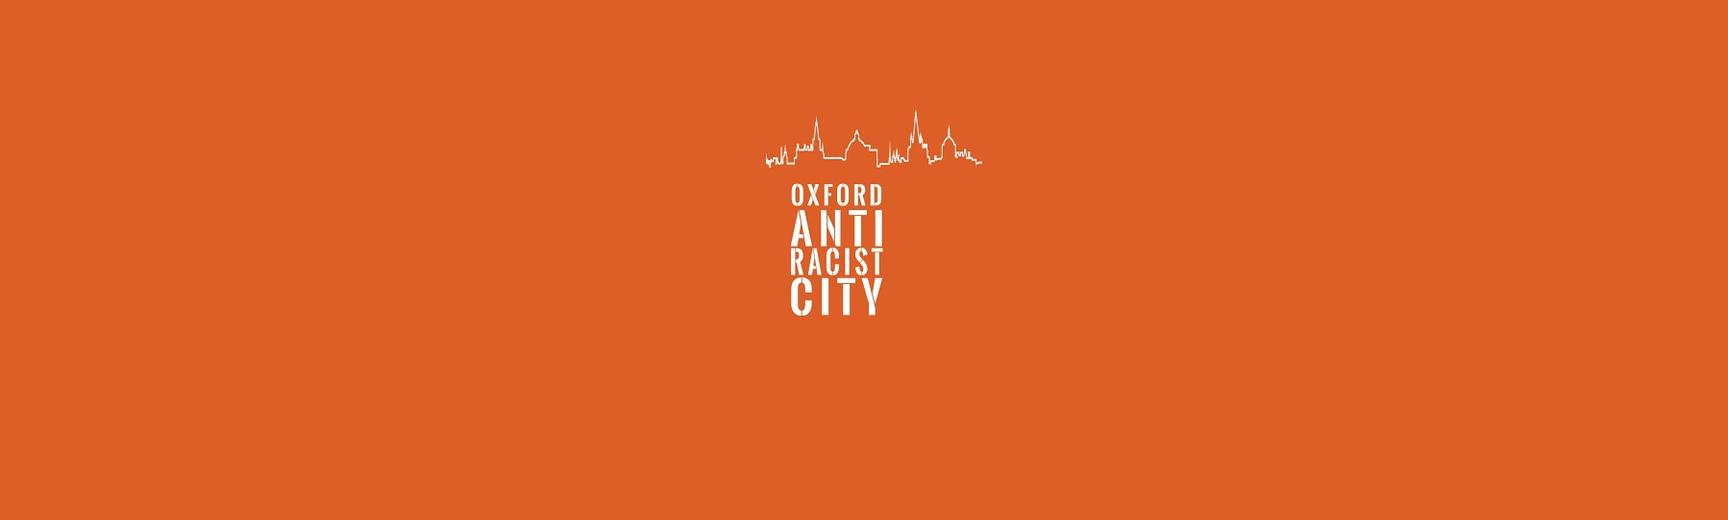 oxford city council banner image